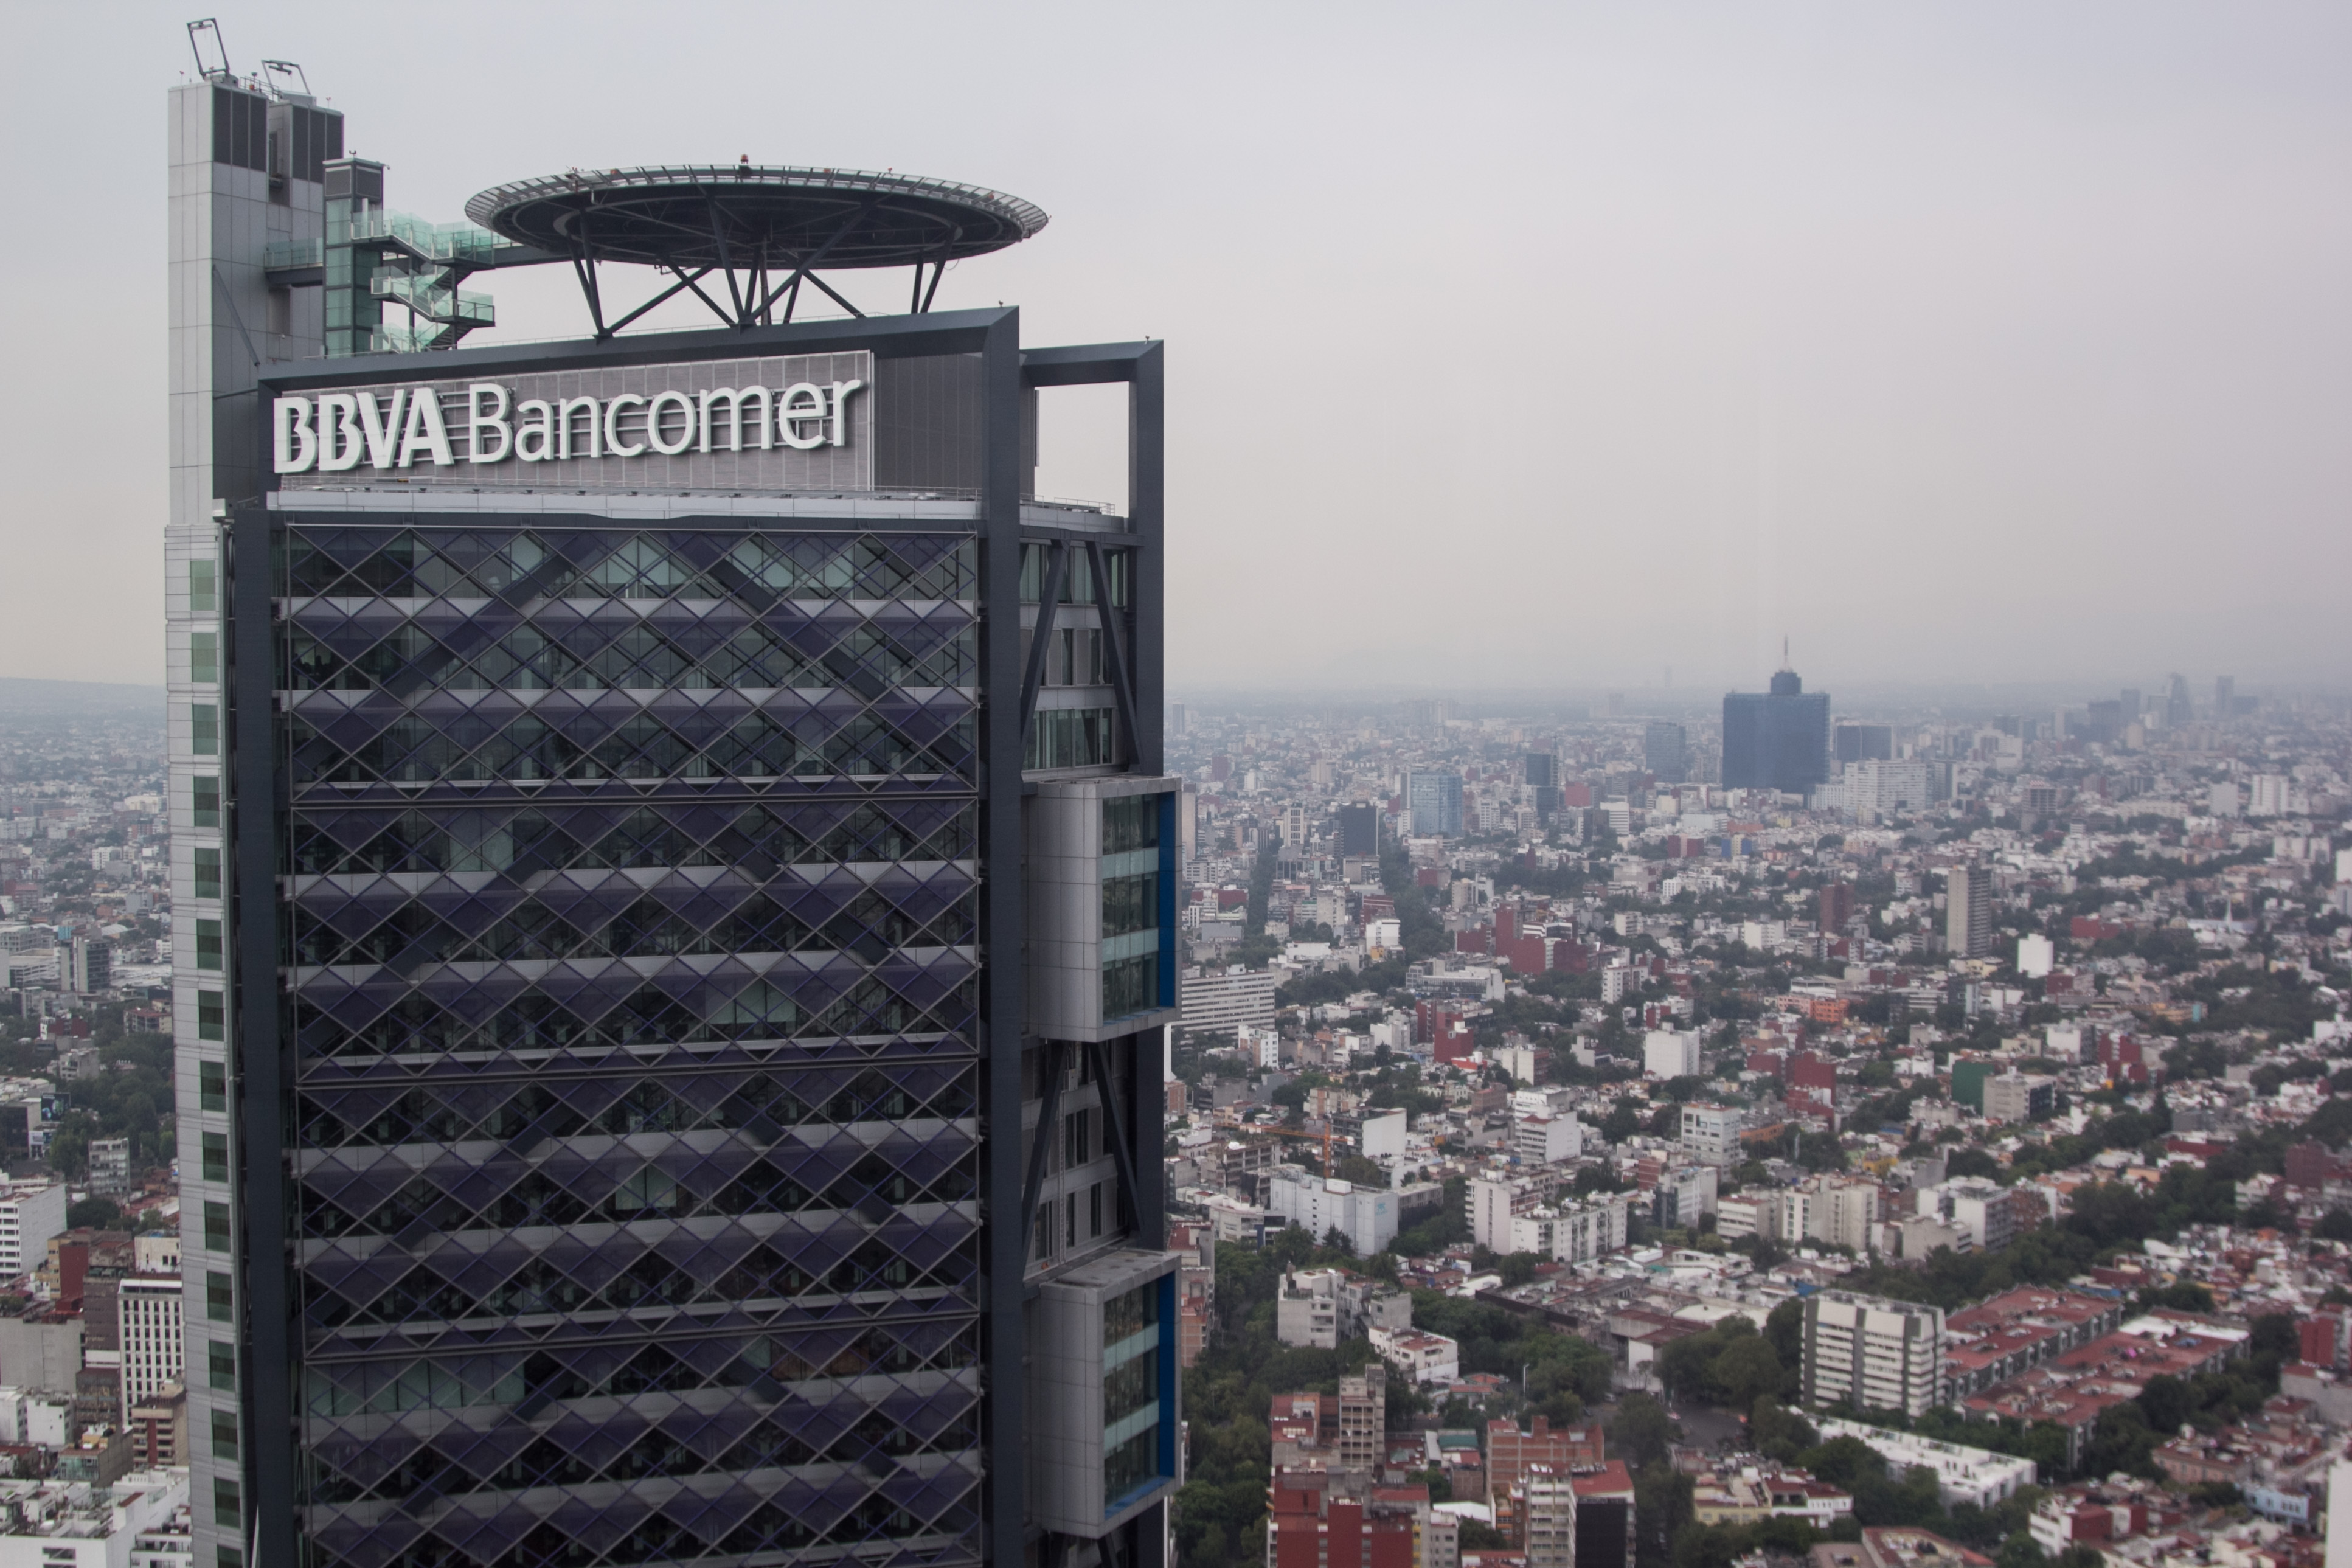 They evicted Tower Bancomer after receiving anonymous threats